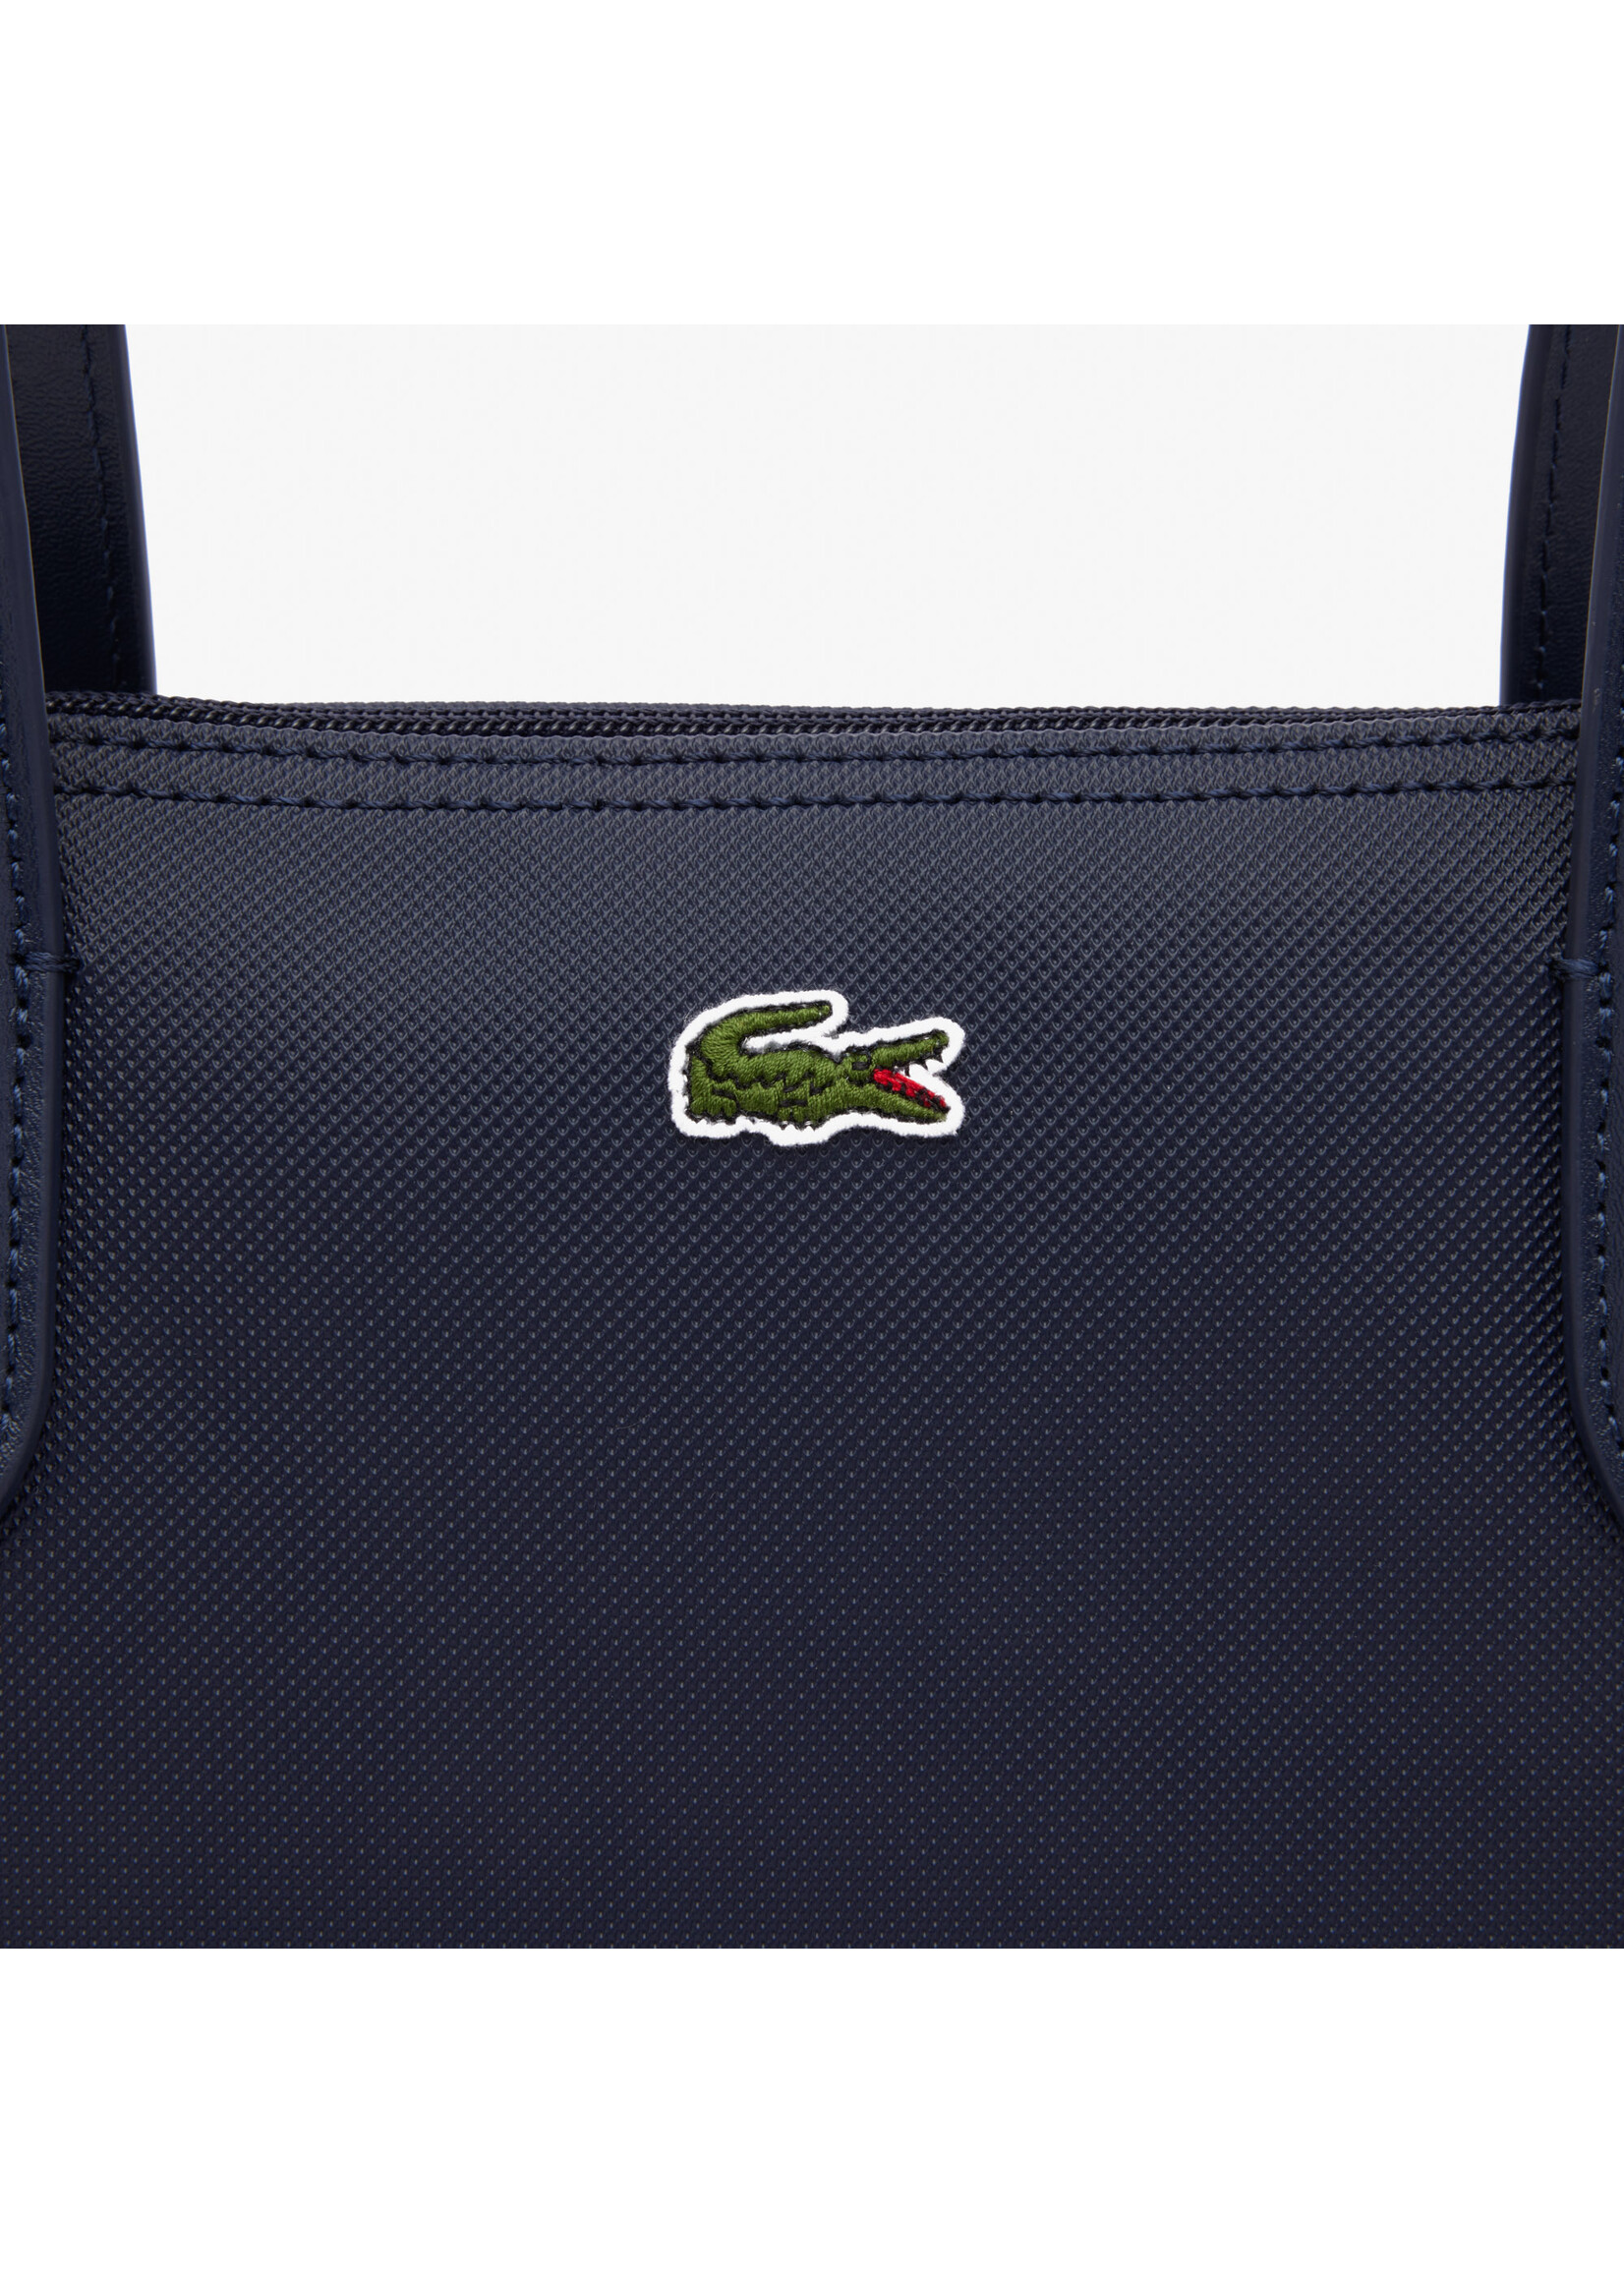 LACOSTE ZIPPERED TOTE BAG L.12.12 CONCEPT UNI-PENUMBER